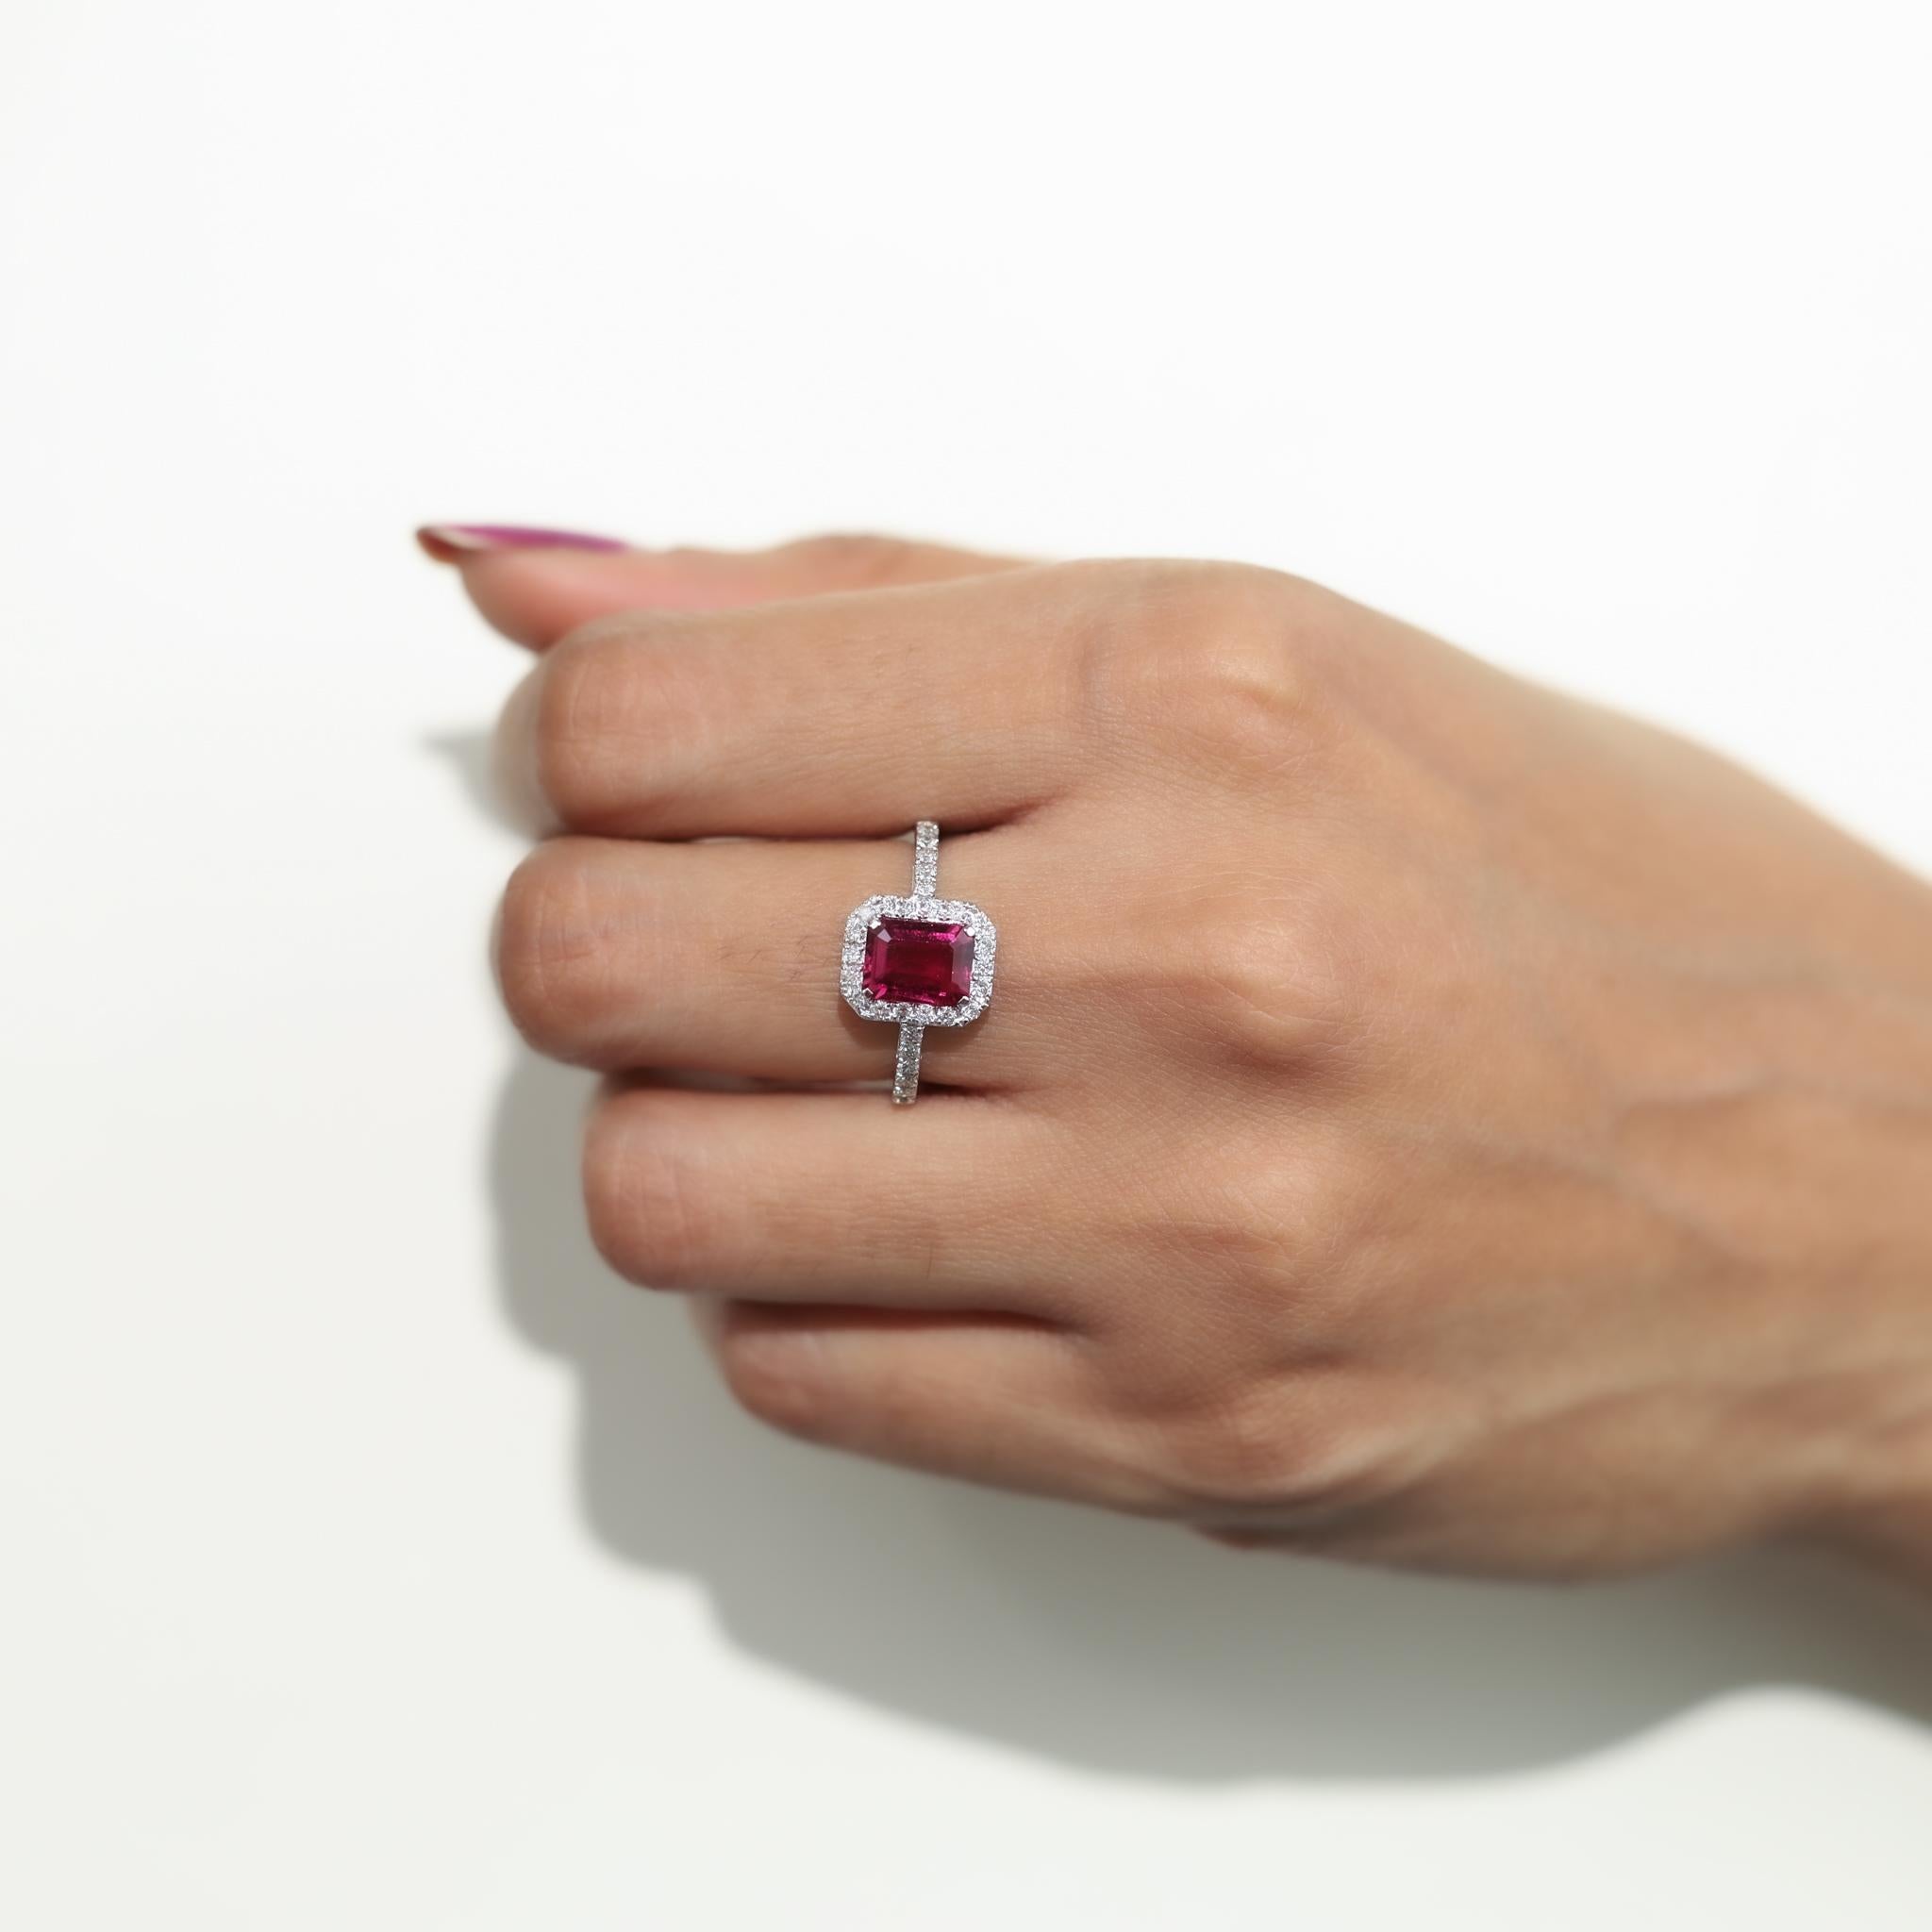 Women's 1.5 Carat Rubellite Tourmaline with 0.5Ct Diamonds Cocktail Ring 18k White For Sale